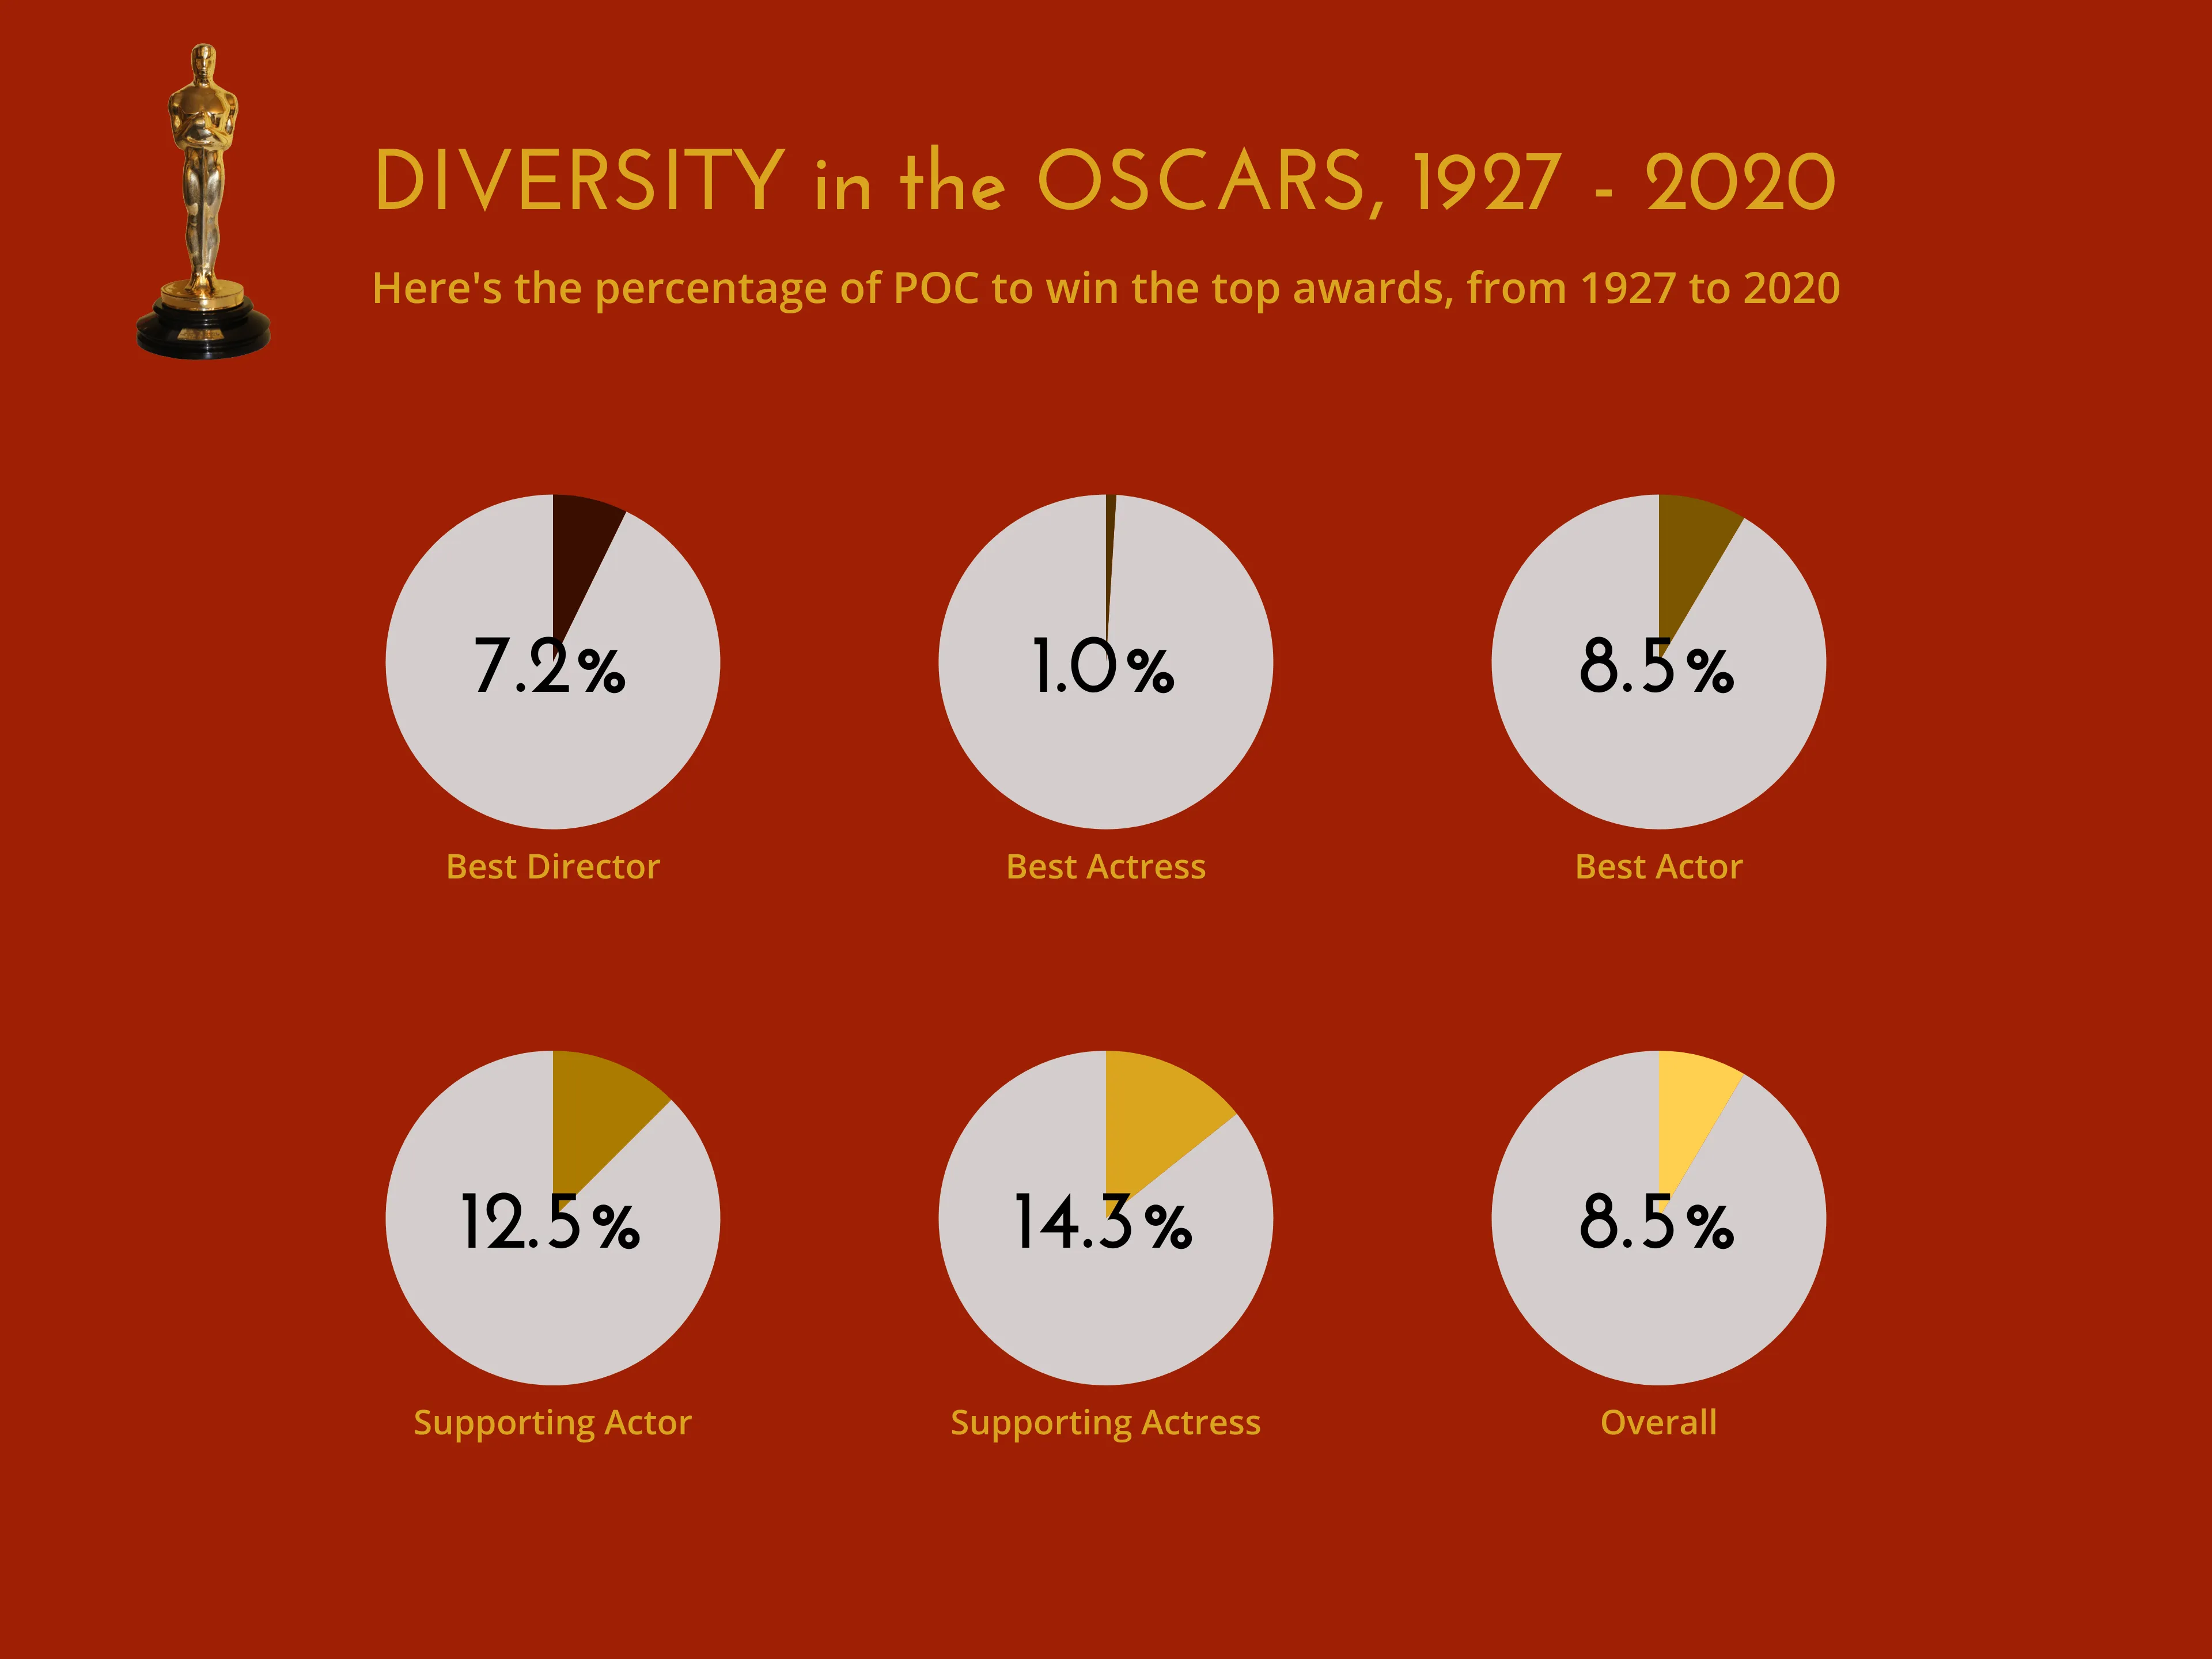 DIVERSITY in the OSCARS, 1927 - 2020